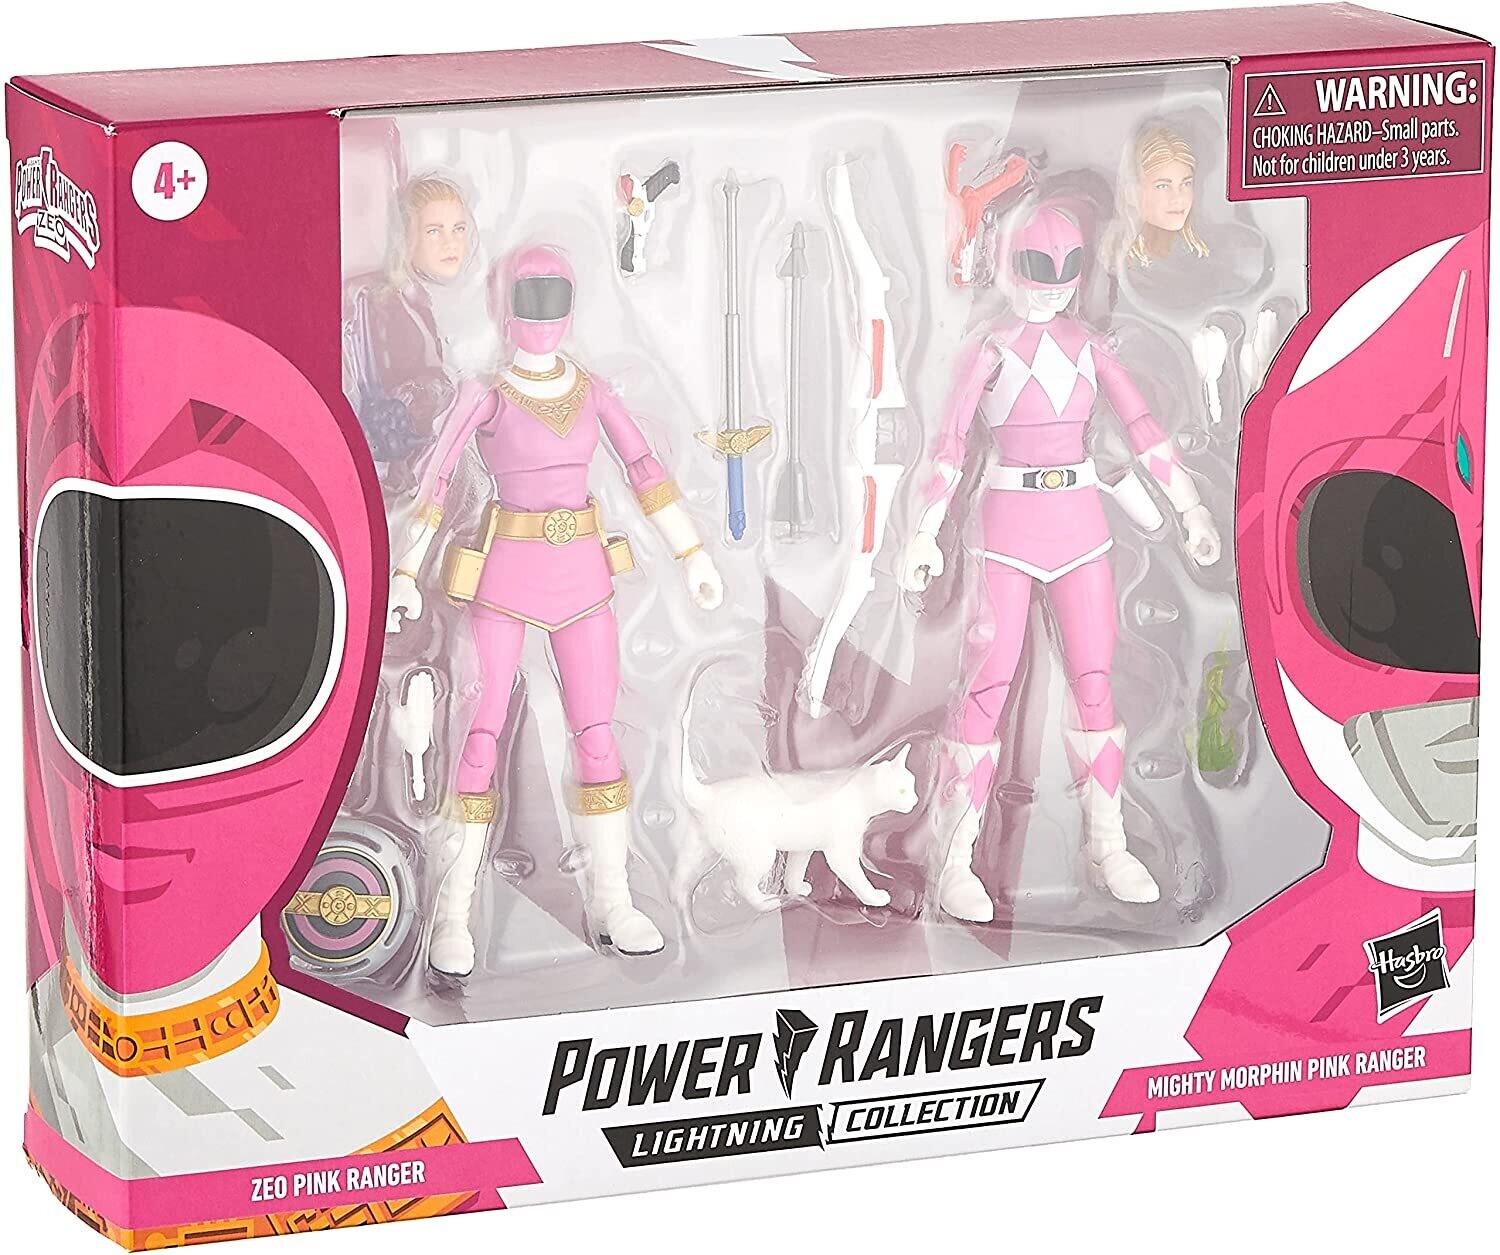 Pre-Order: Hasbro Saban’s Power Rangers Lightning Collection Mighty Morphin Pink Ranger and Zeo Pink Ranger Exclusive 2 Pack